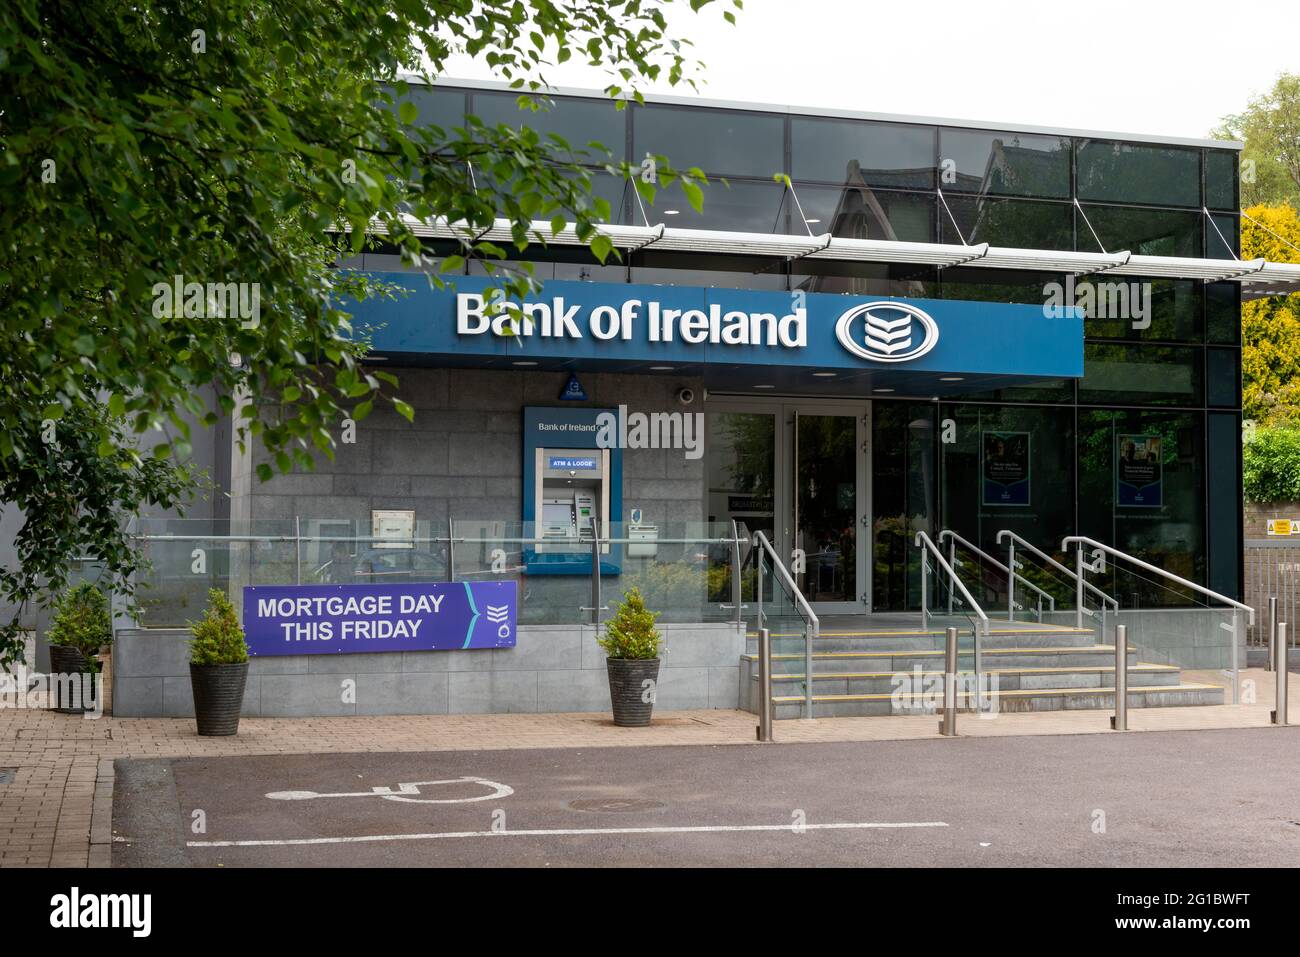 Mortgage day this Friday sign outside the Bank of Ireland branch in Killarney, County Kerry, Ireland Stock Photo